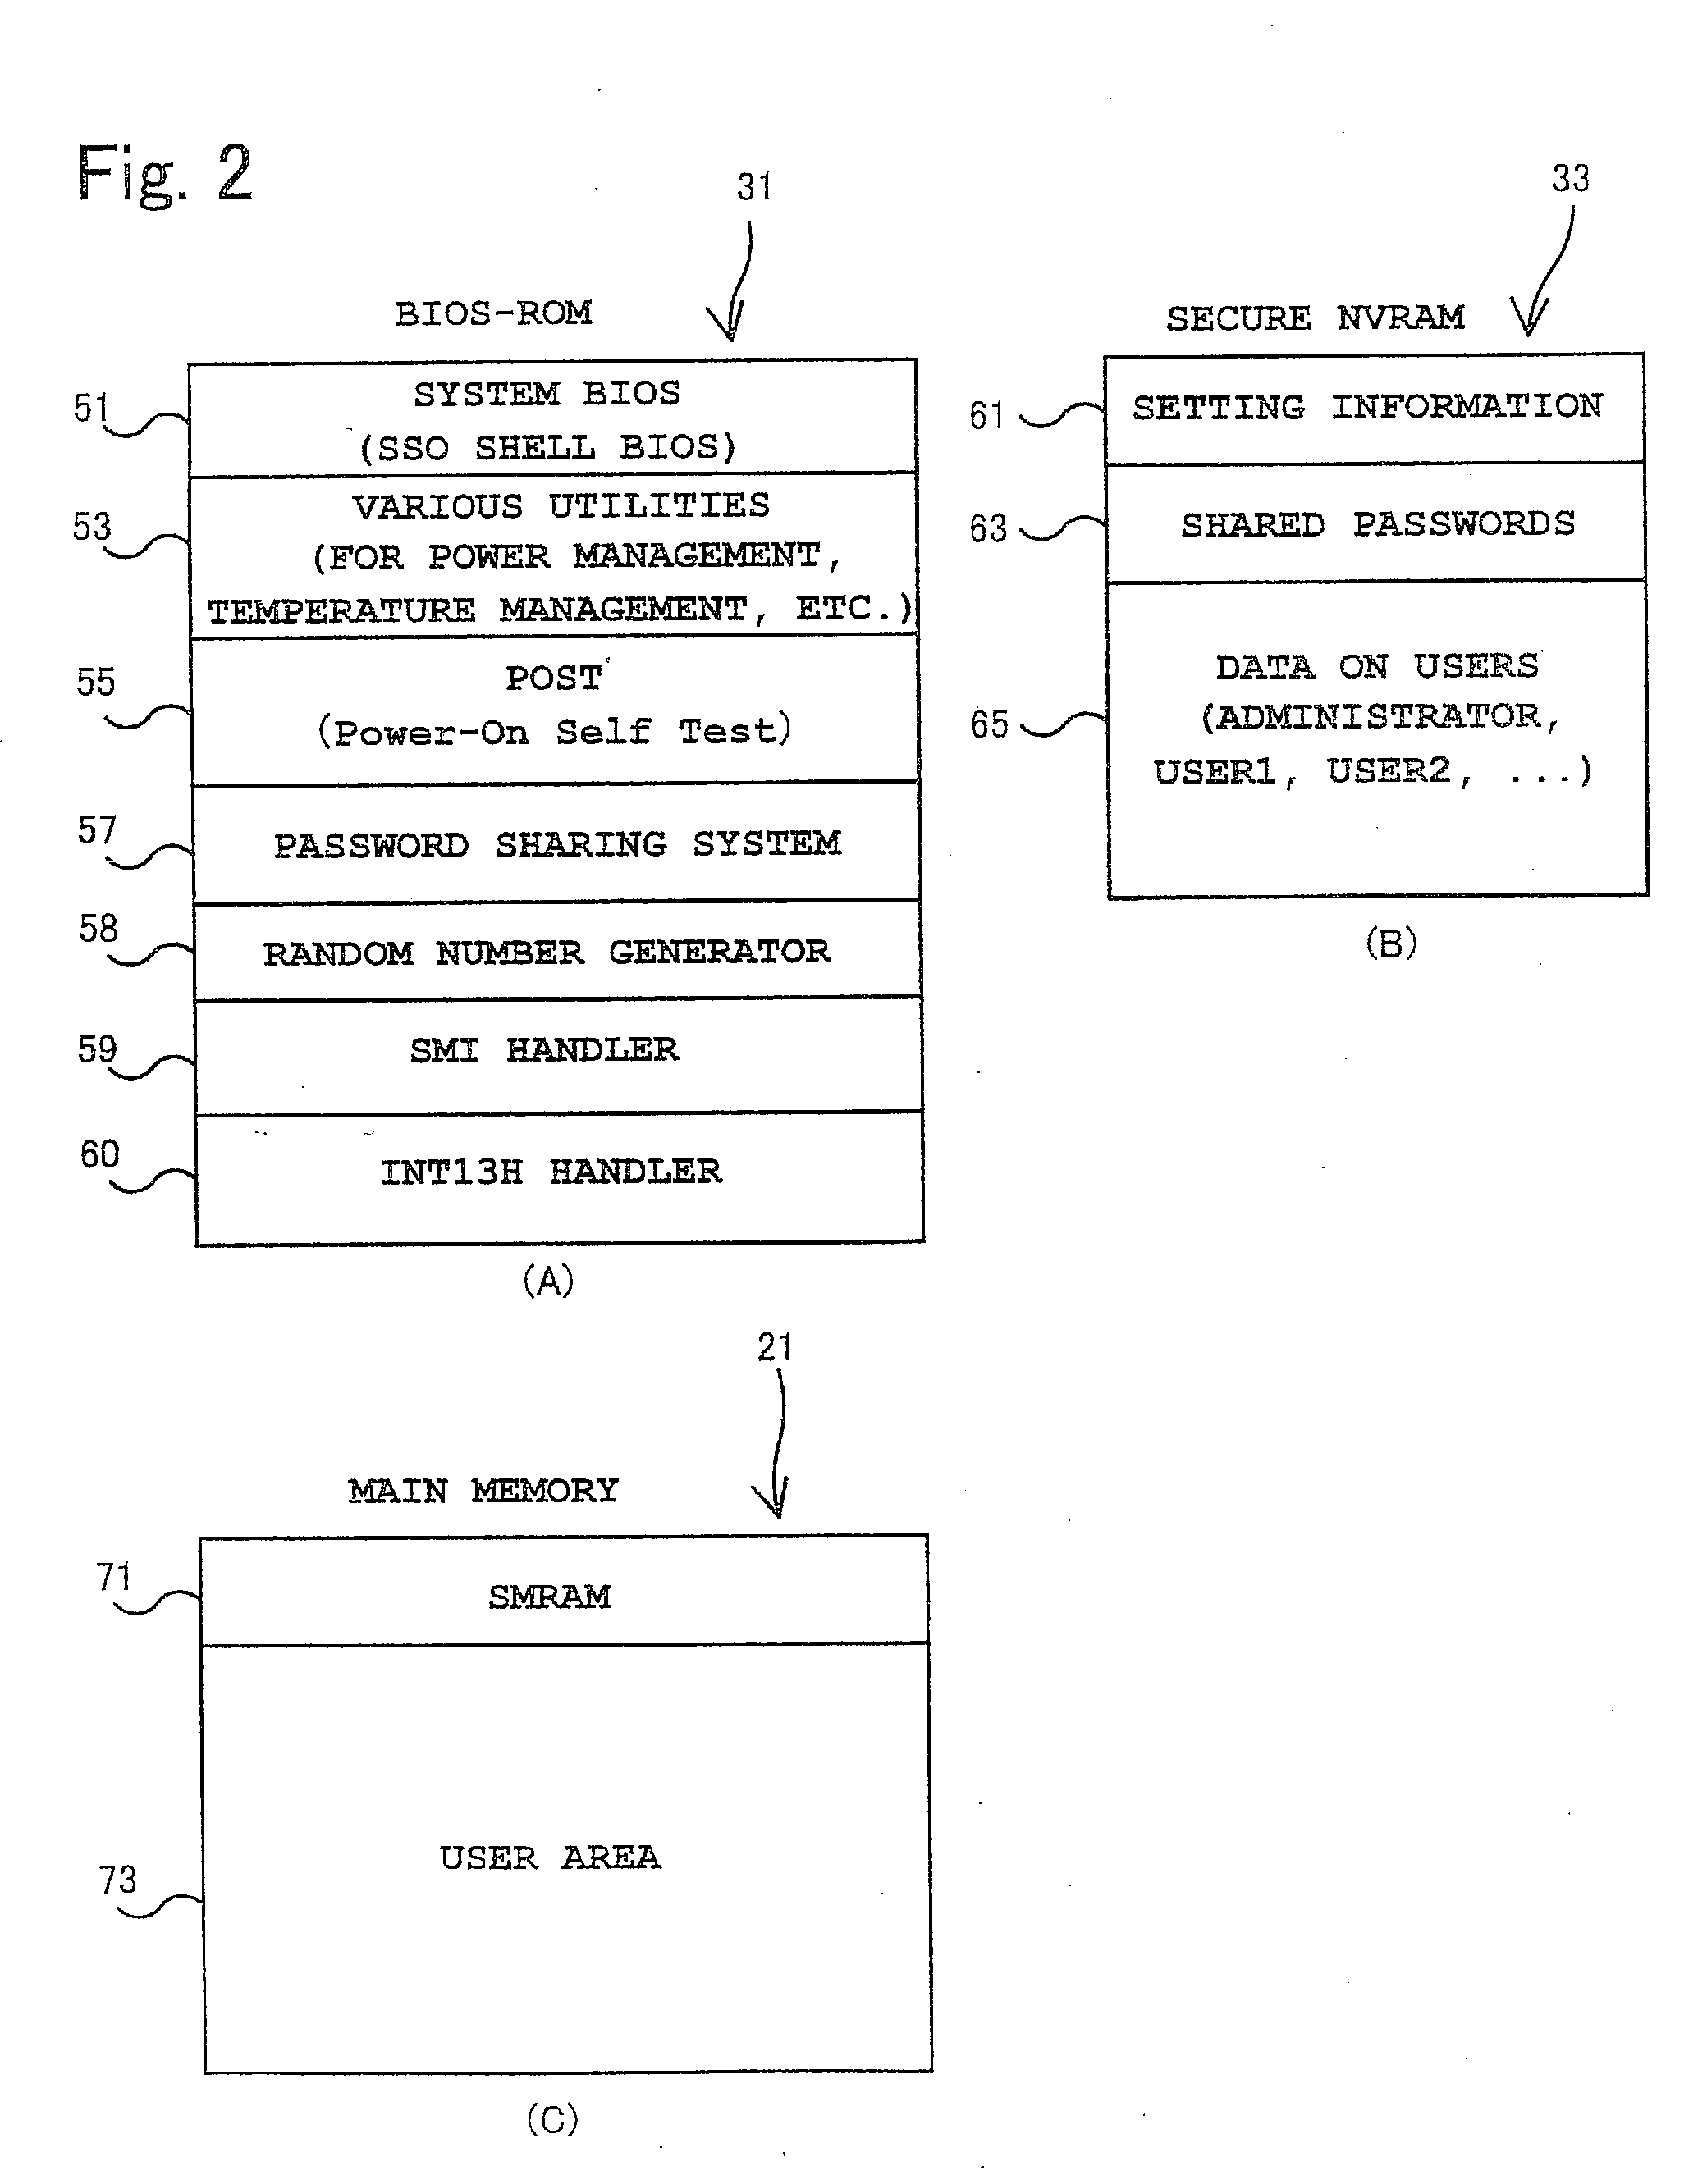 Method and Apparatus for Managing Shared Passwords on a Multi-User Computer